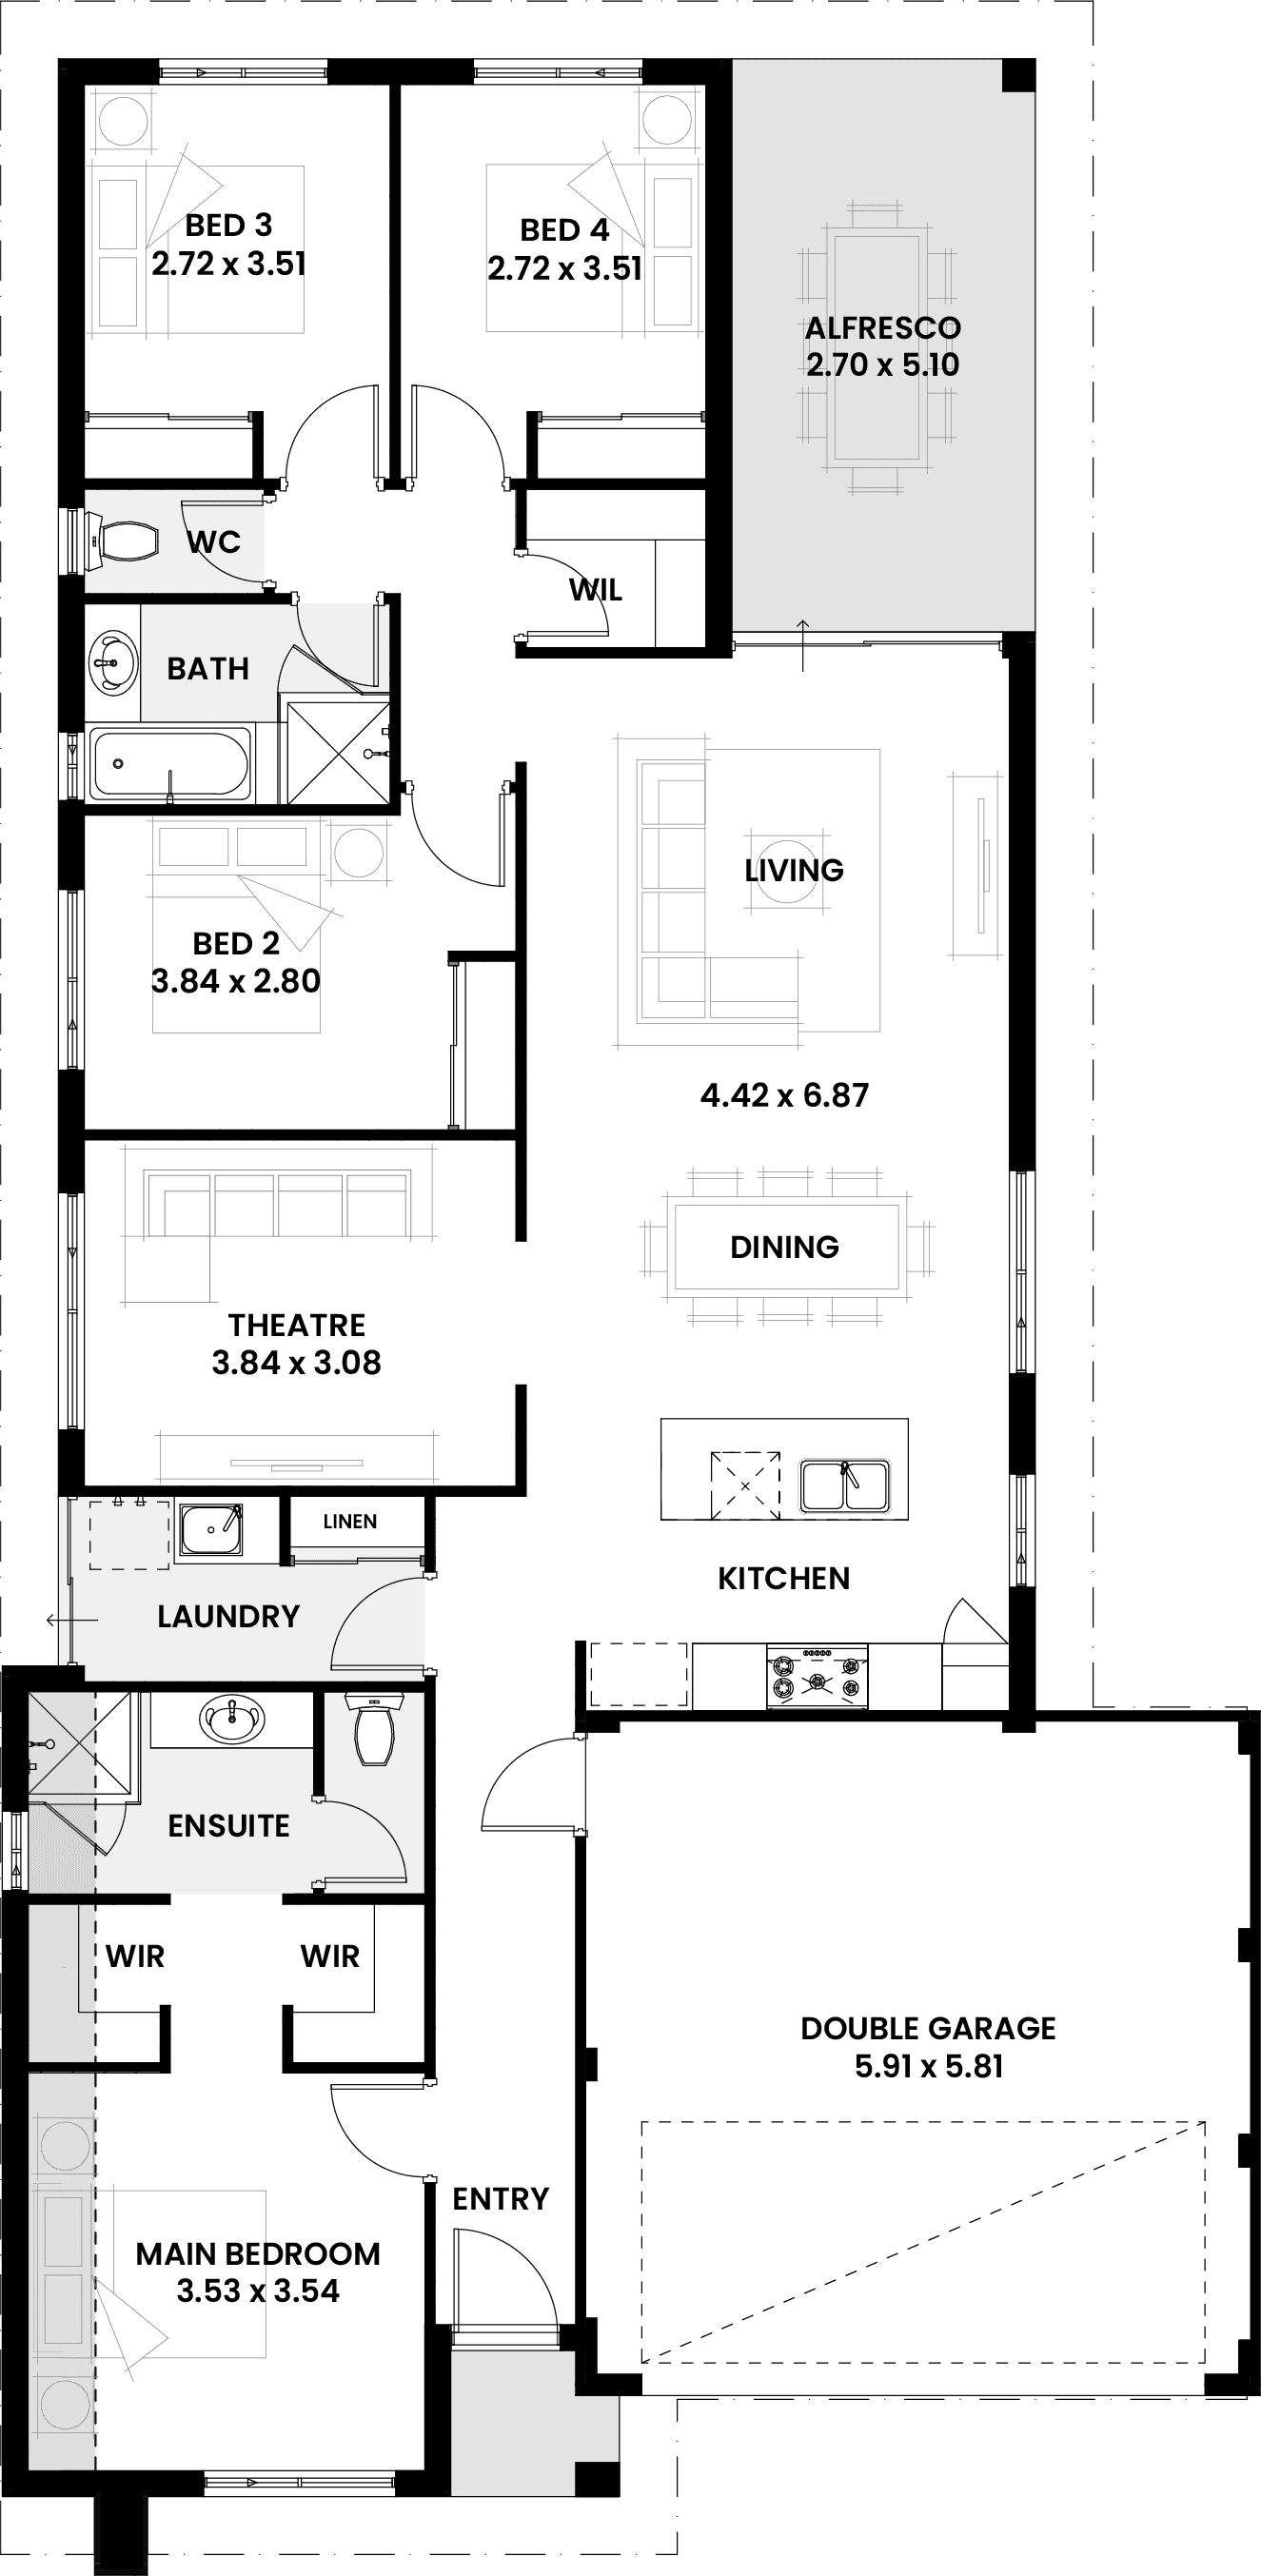 Floorplan for The Hemlock, a Move Homes new home design perfect for first time buyers and new builders in Perth